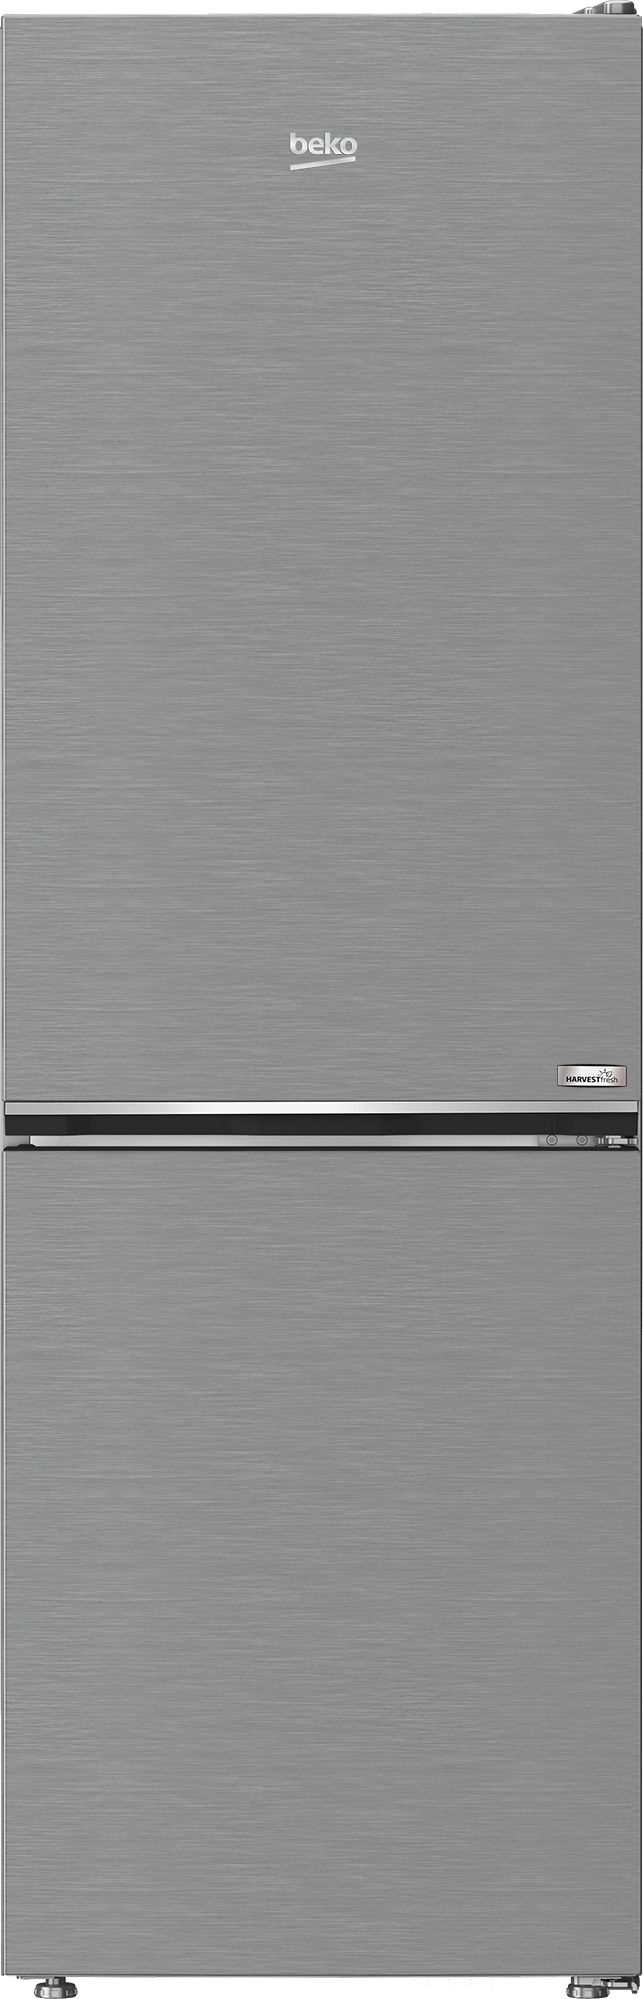 Beko CFG4686VPS 60/40 Frost Free Fridge Freezer - Stainless Steel Effect - E Rated, Stainless Steel